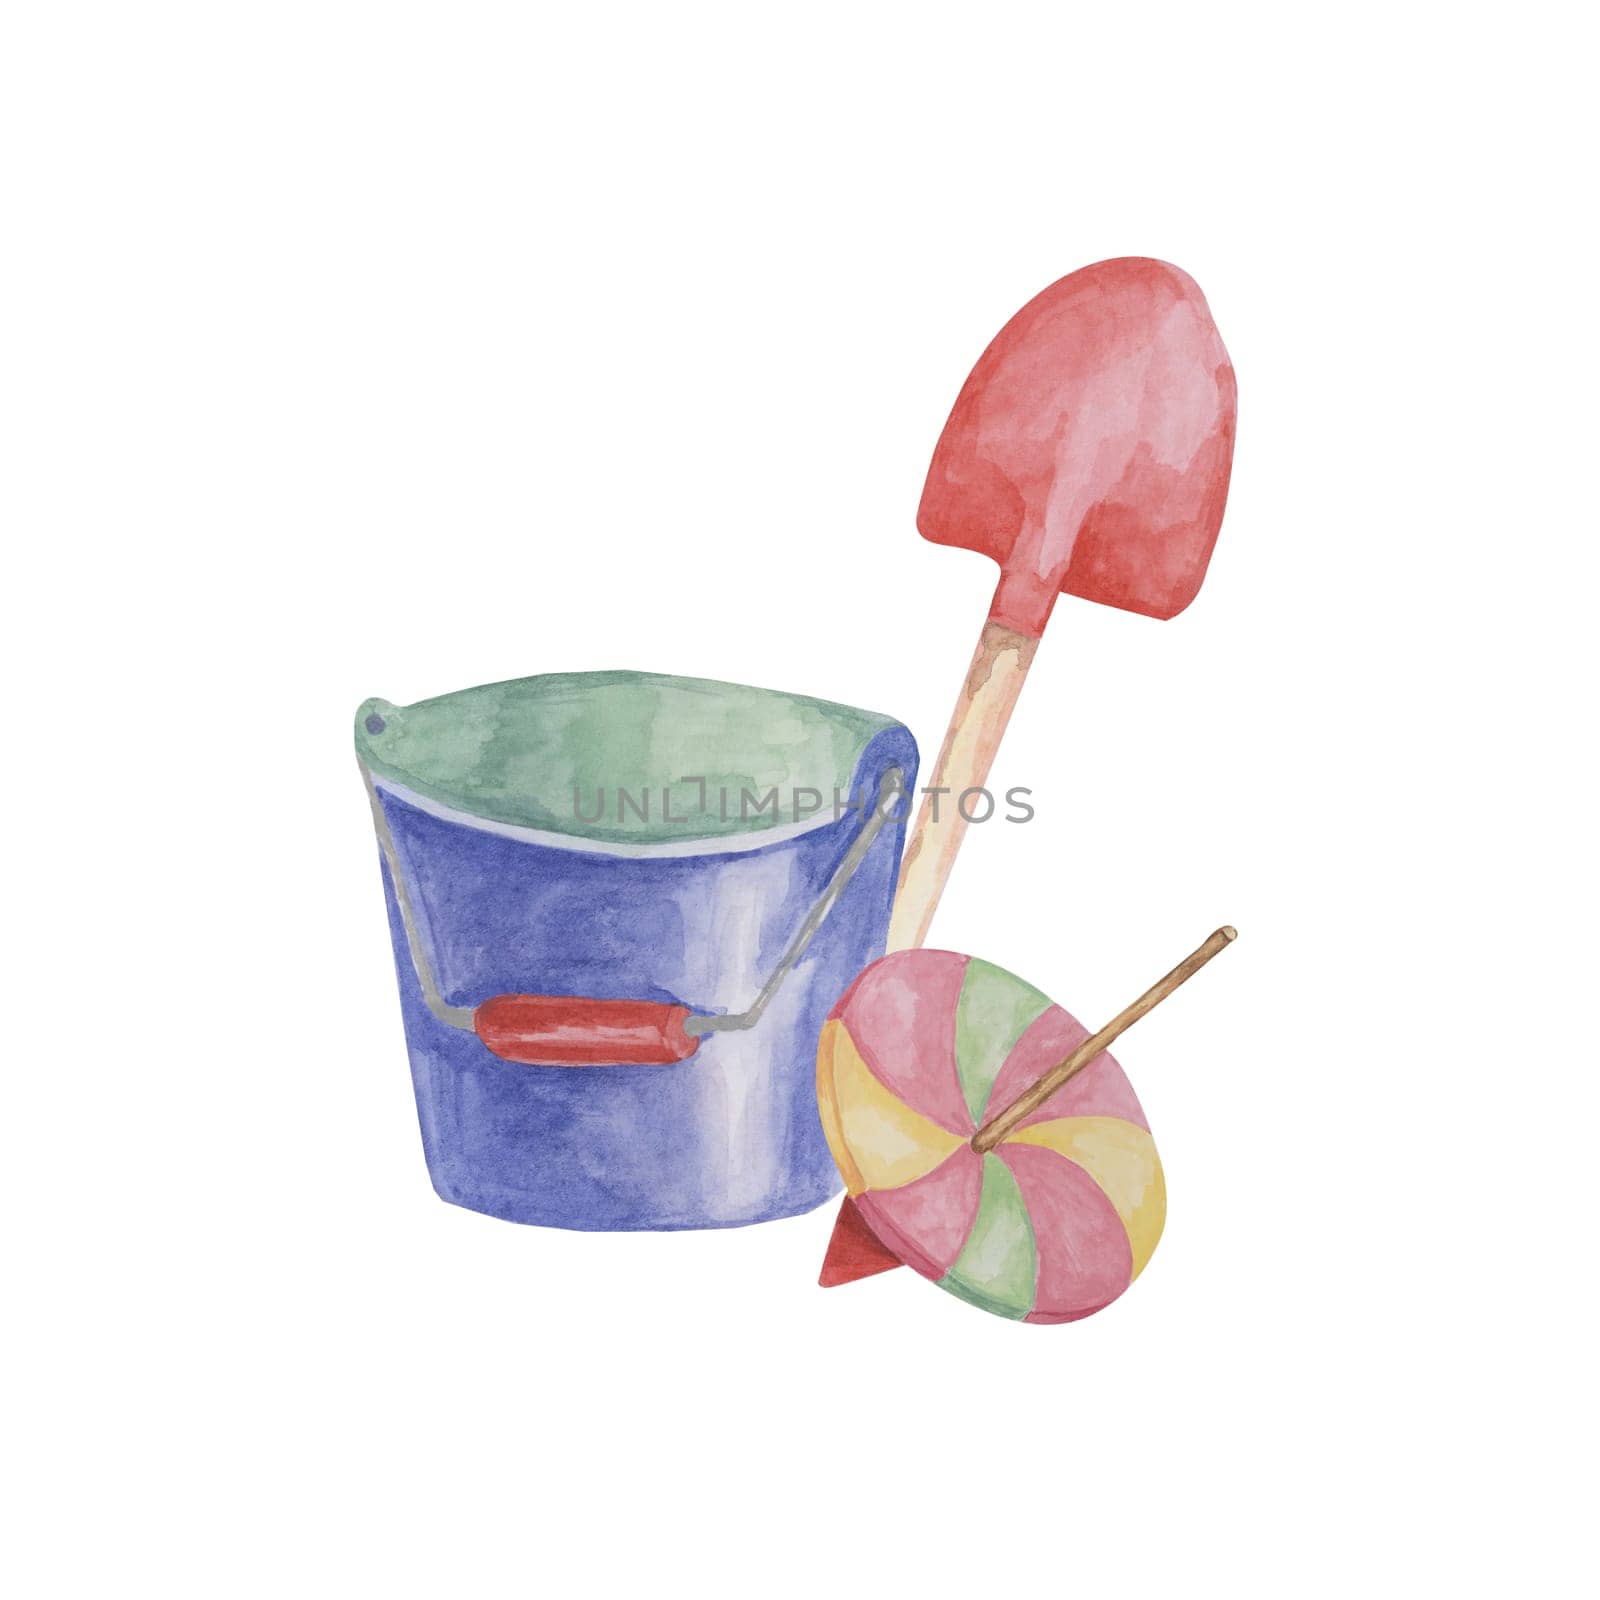 Toy bucket, shovel and whirligig. Beach toys clipart, retro spinning top and sand play watercolor illustration for kids party, sticker, invitation by Fofito